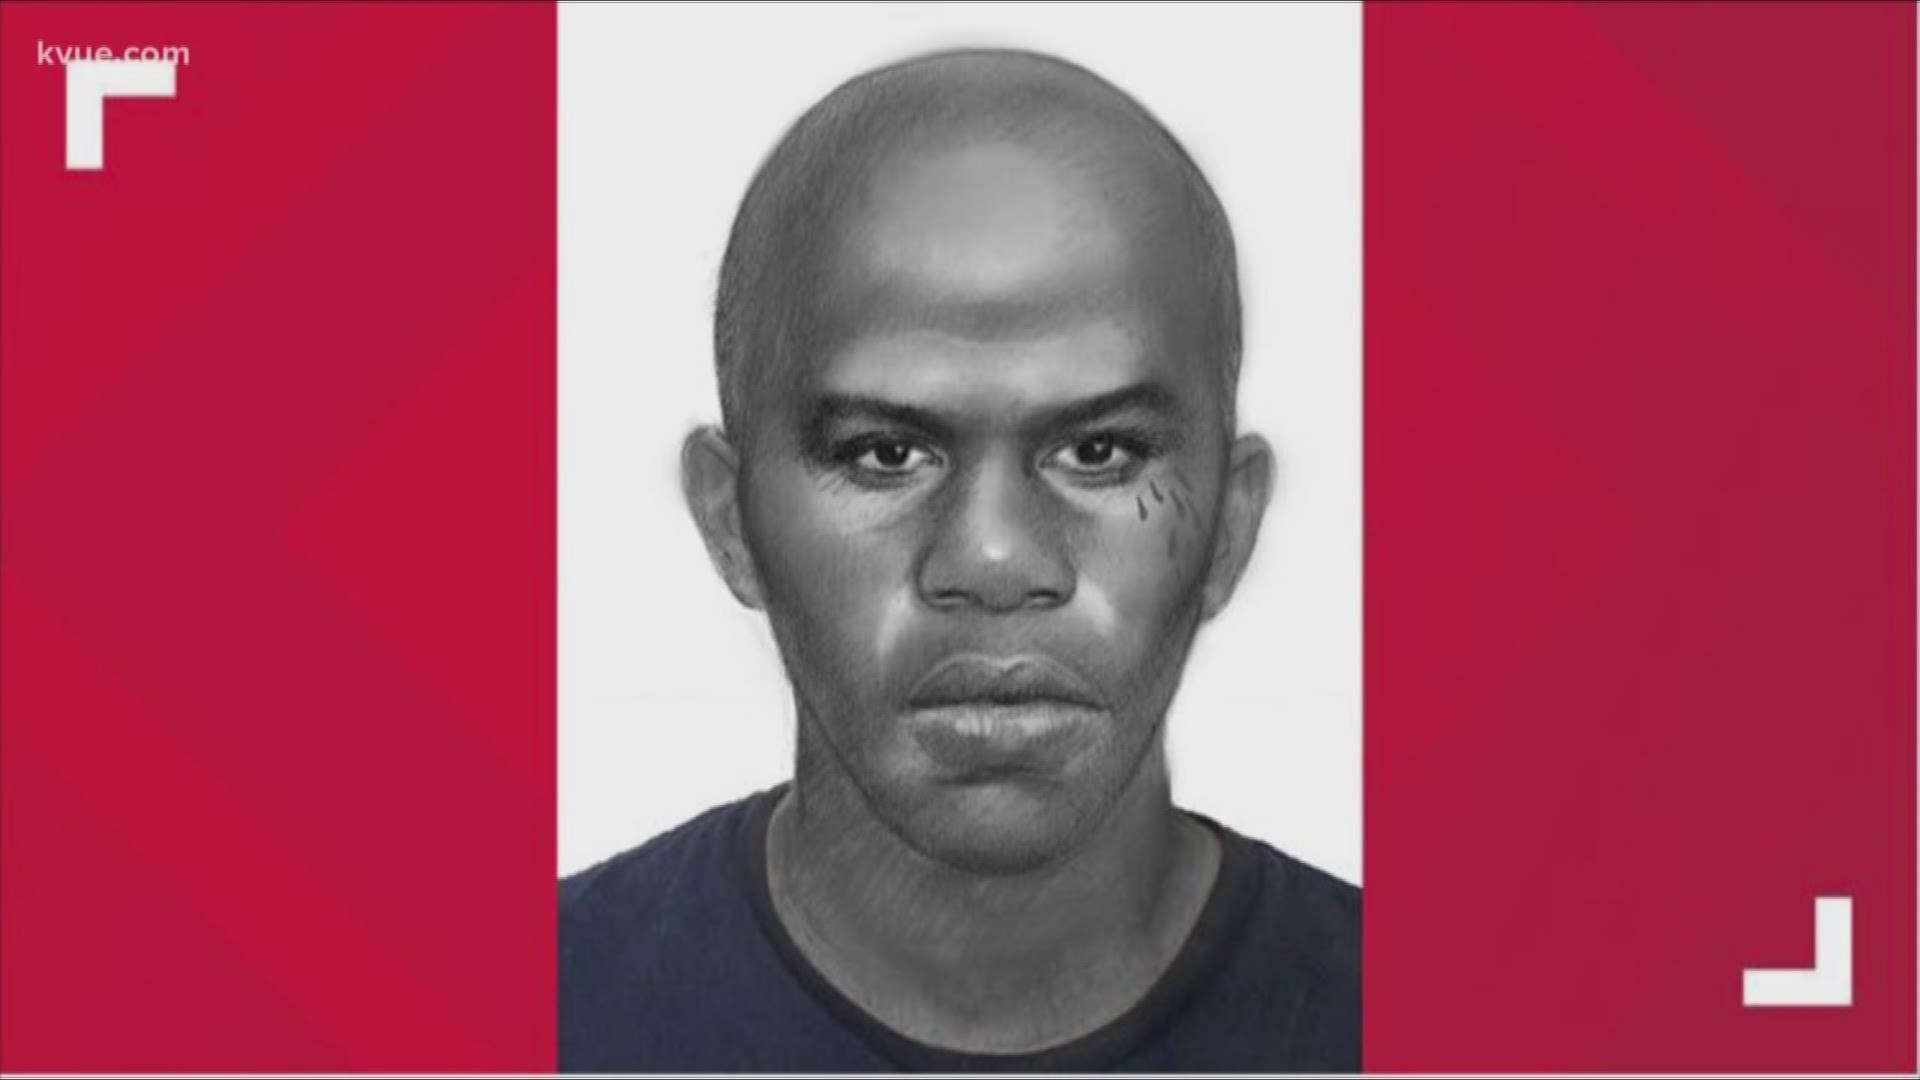 A new sketch of the suspect was released on Friday.